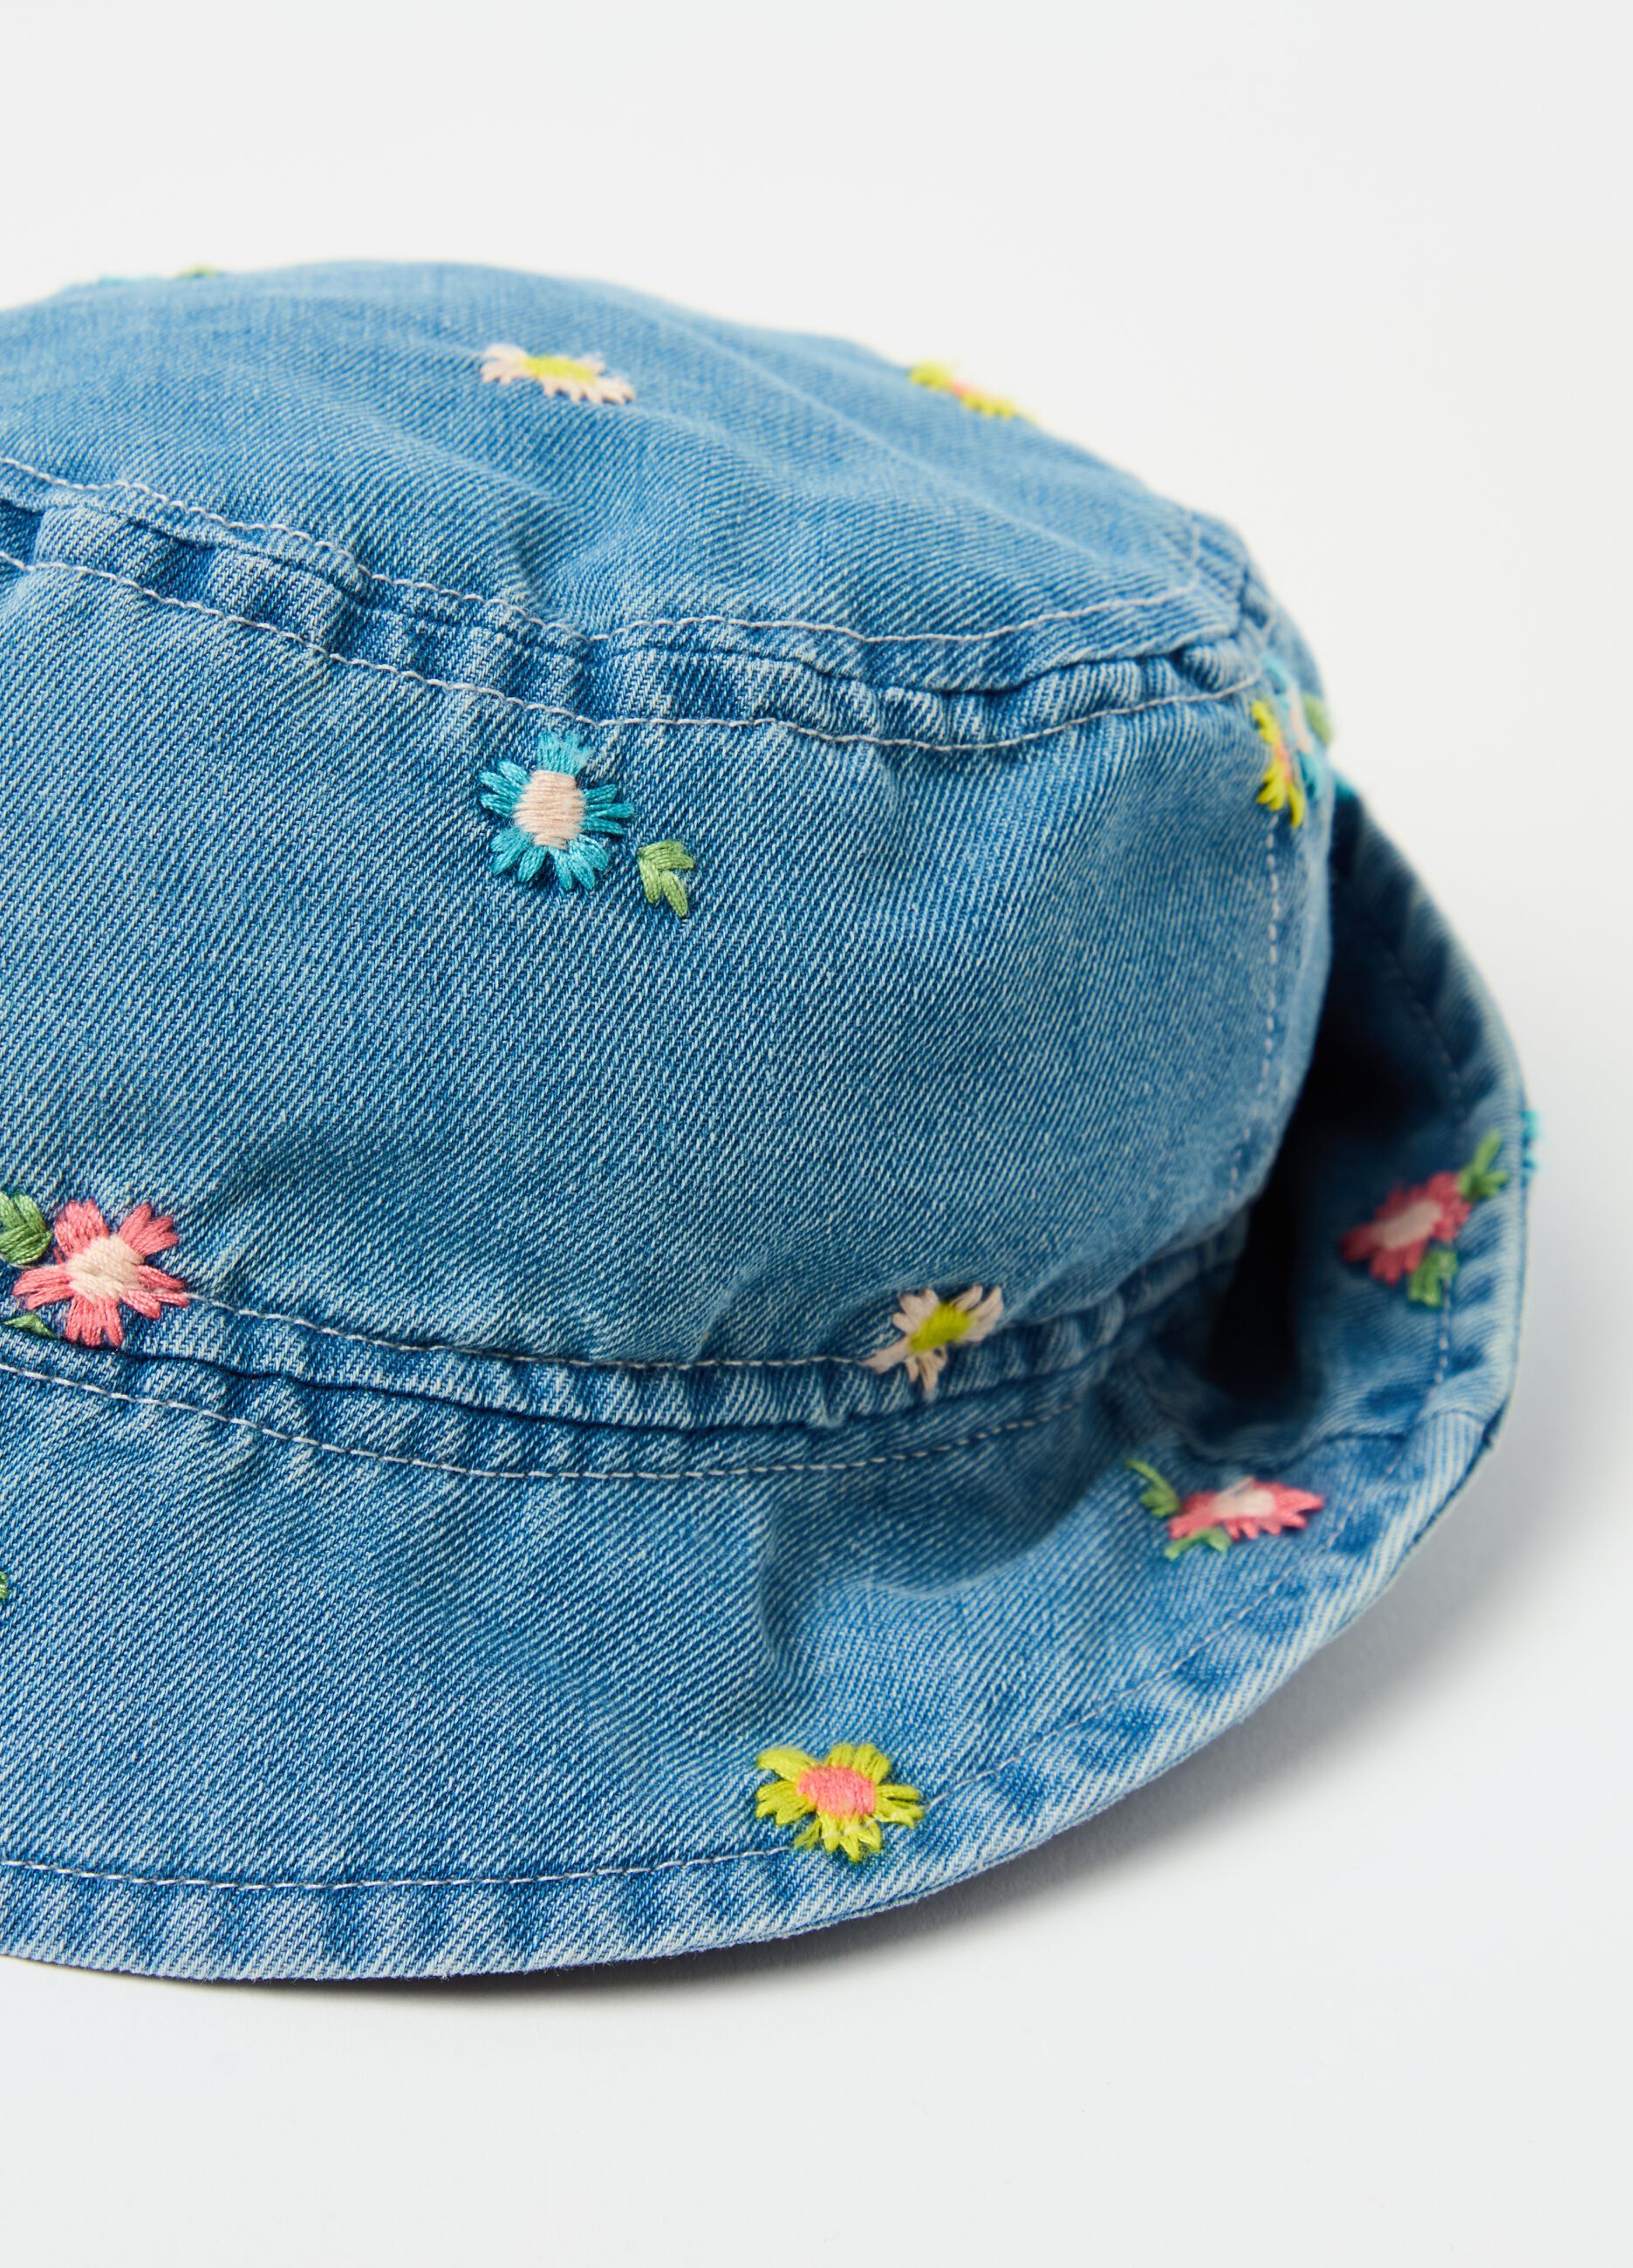 Denim fishing hat with embroidery